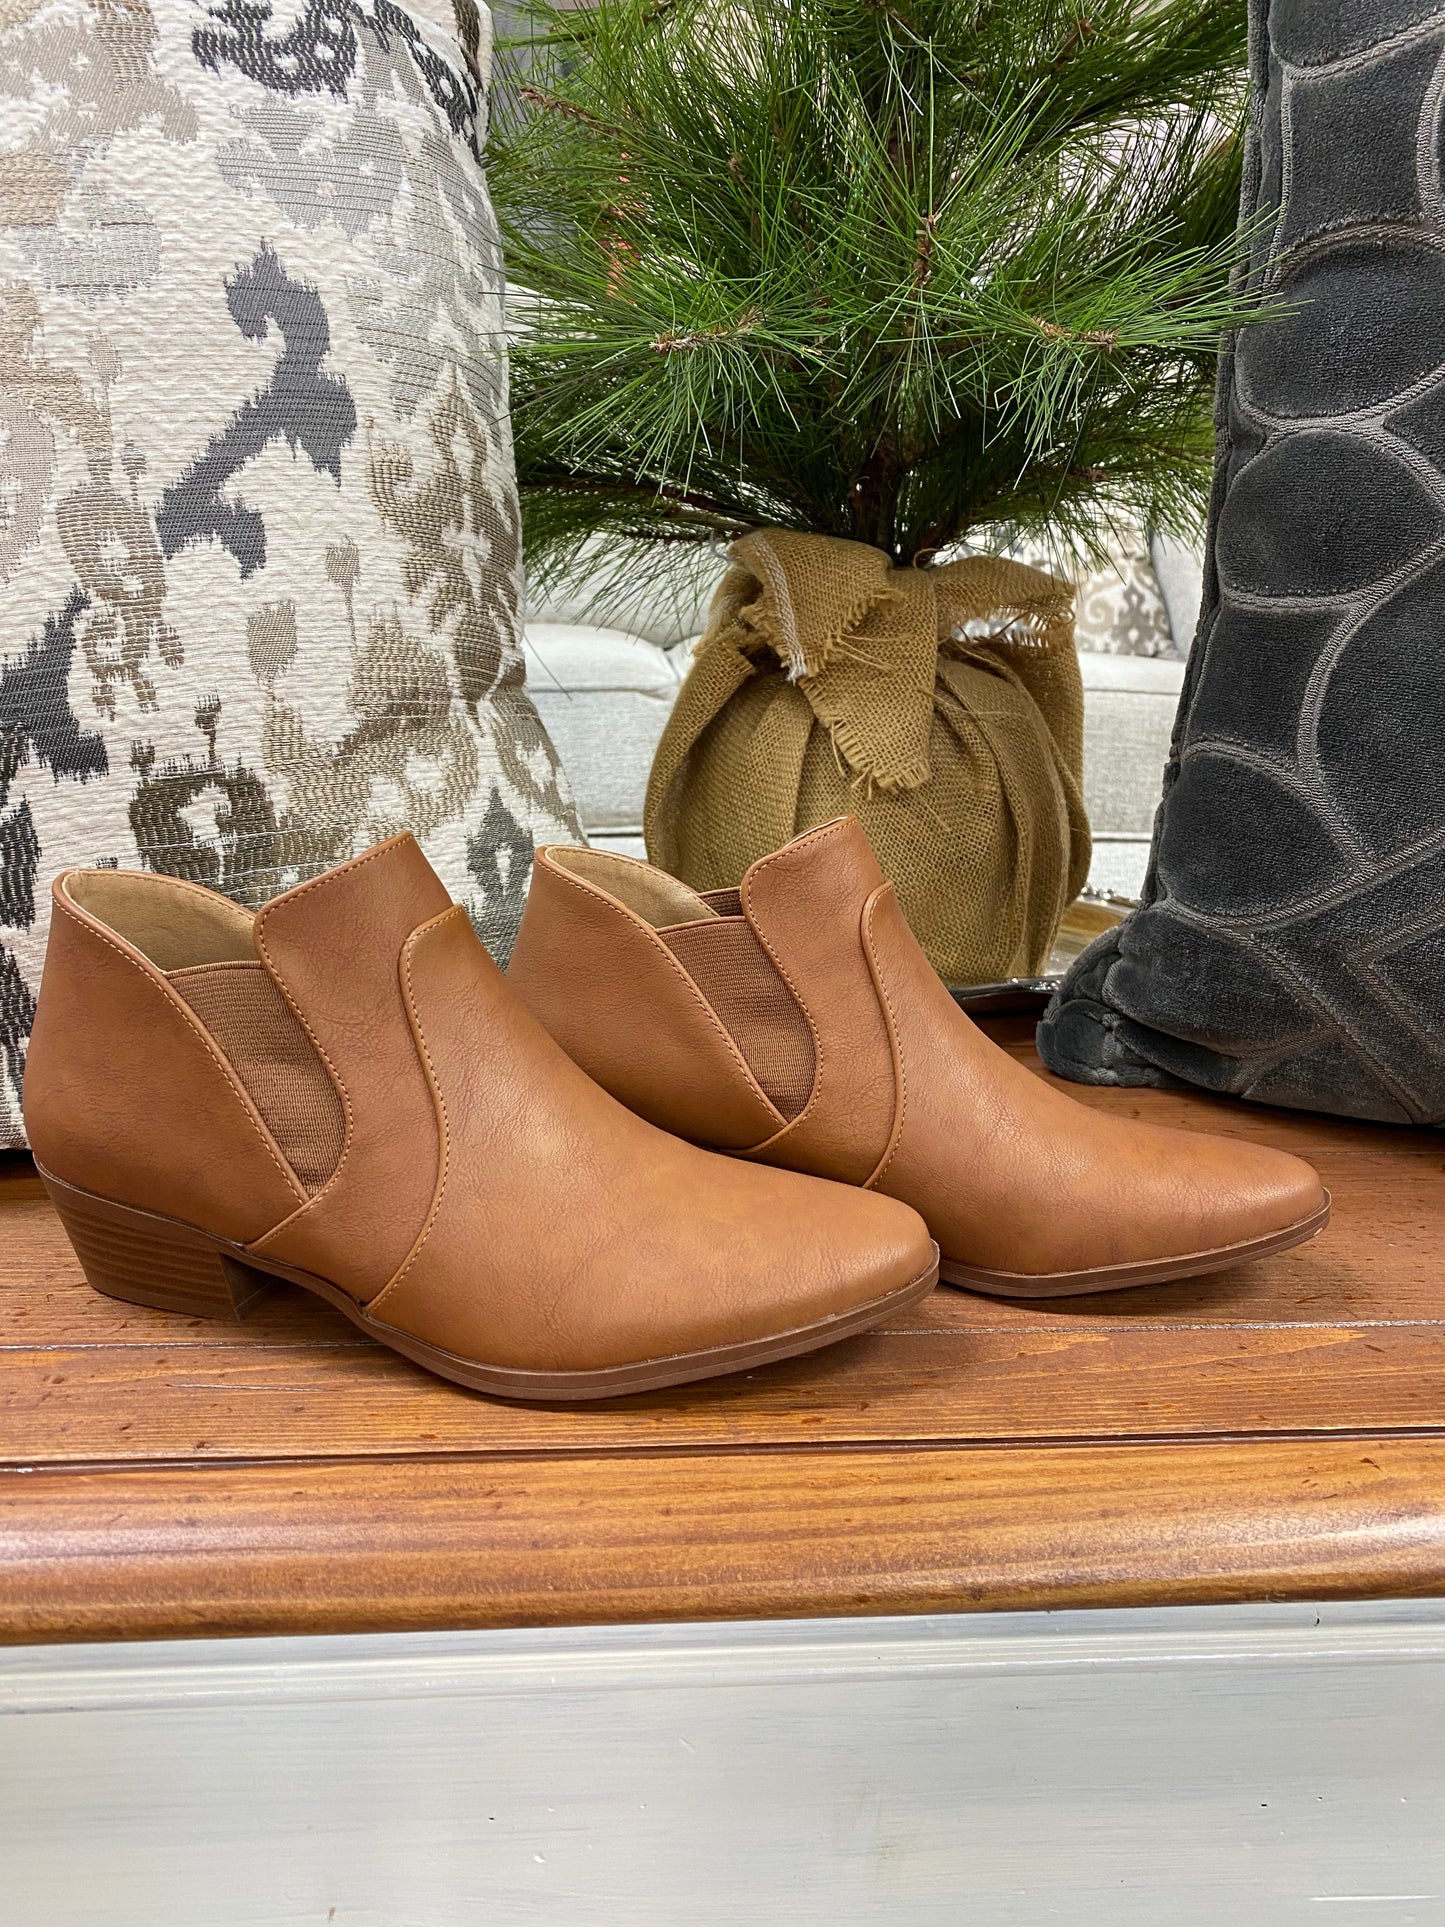 Qupid Camel Booties - Whitt & Co. Clothing